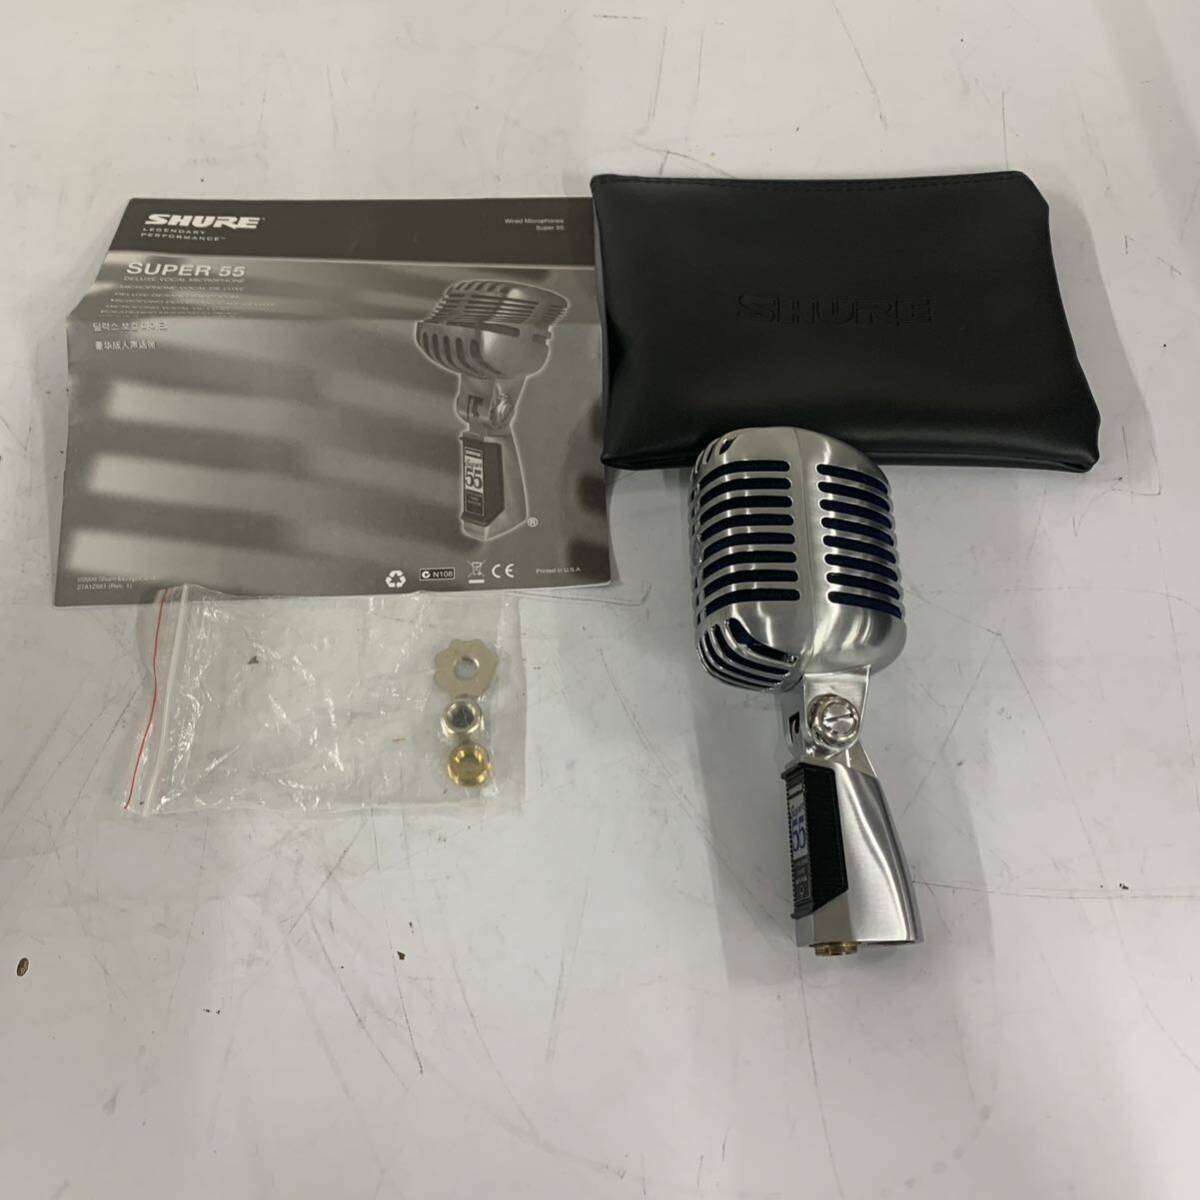 [A-2] Shure Super 55 electrodynamic microphone operation verification settled accessory attaching instructions attaching secondhand goods 1715-29